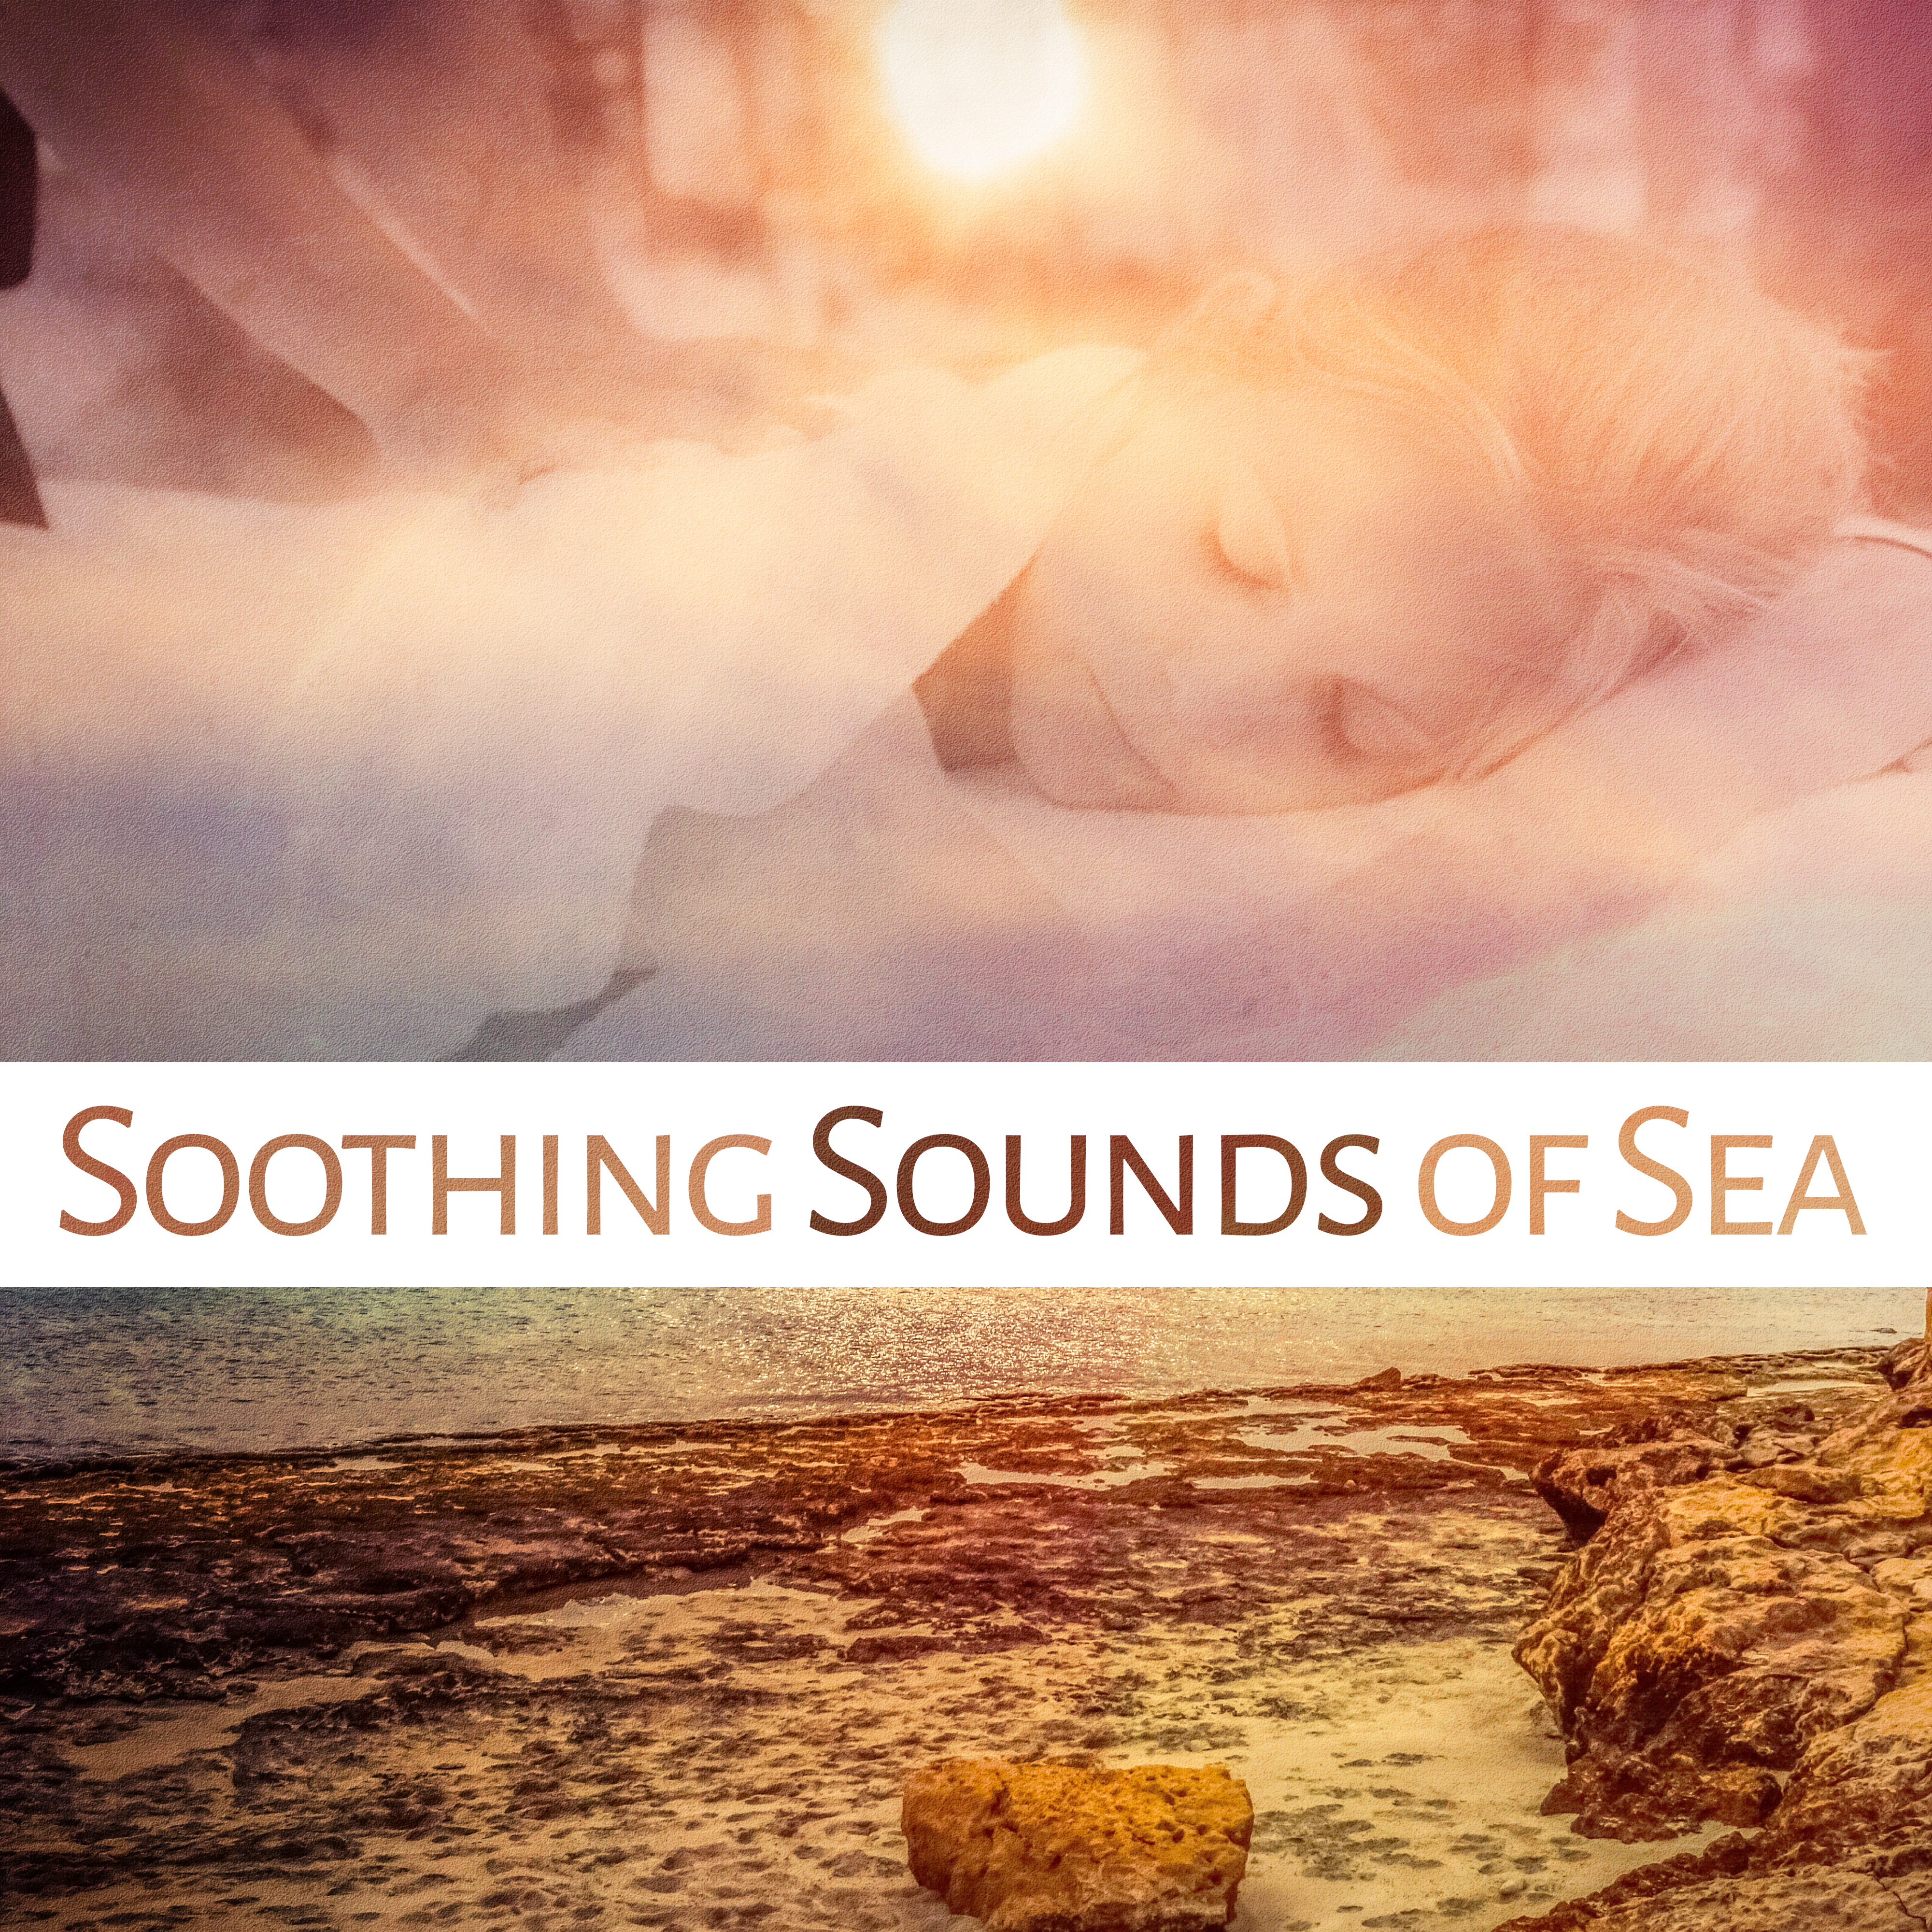 Soothing Sounds of Sea – Spa Dreams, Wellness, Massage for Body, Stress Free, Pure Waves, Calm Down, Nature Sounds for Spa